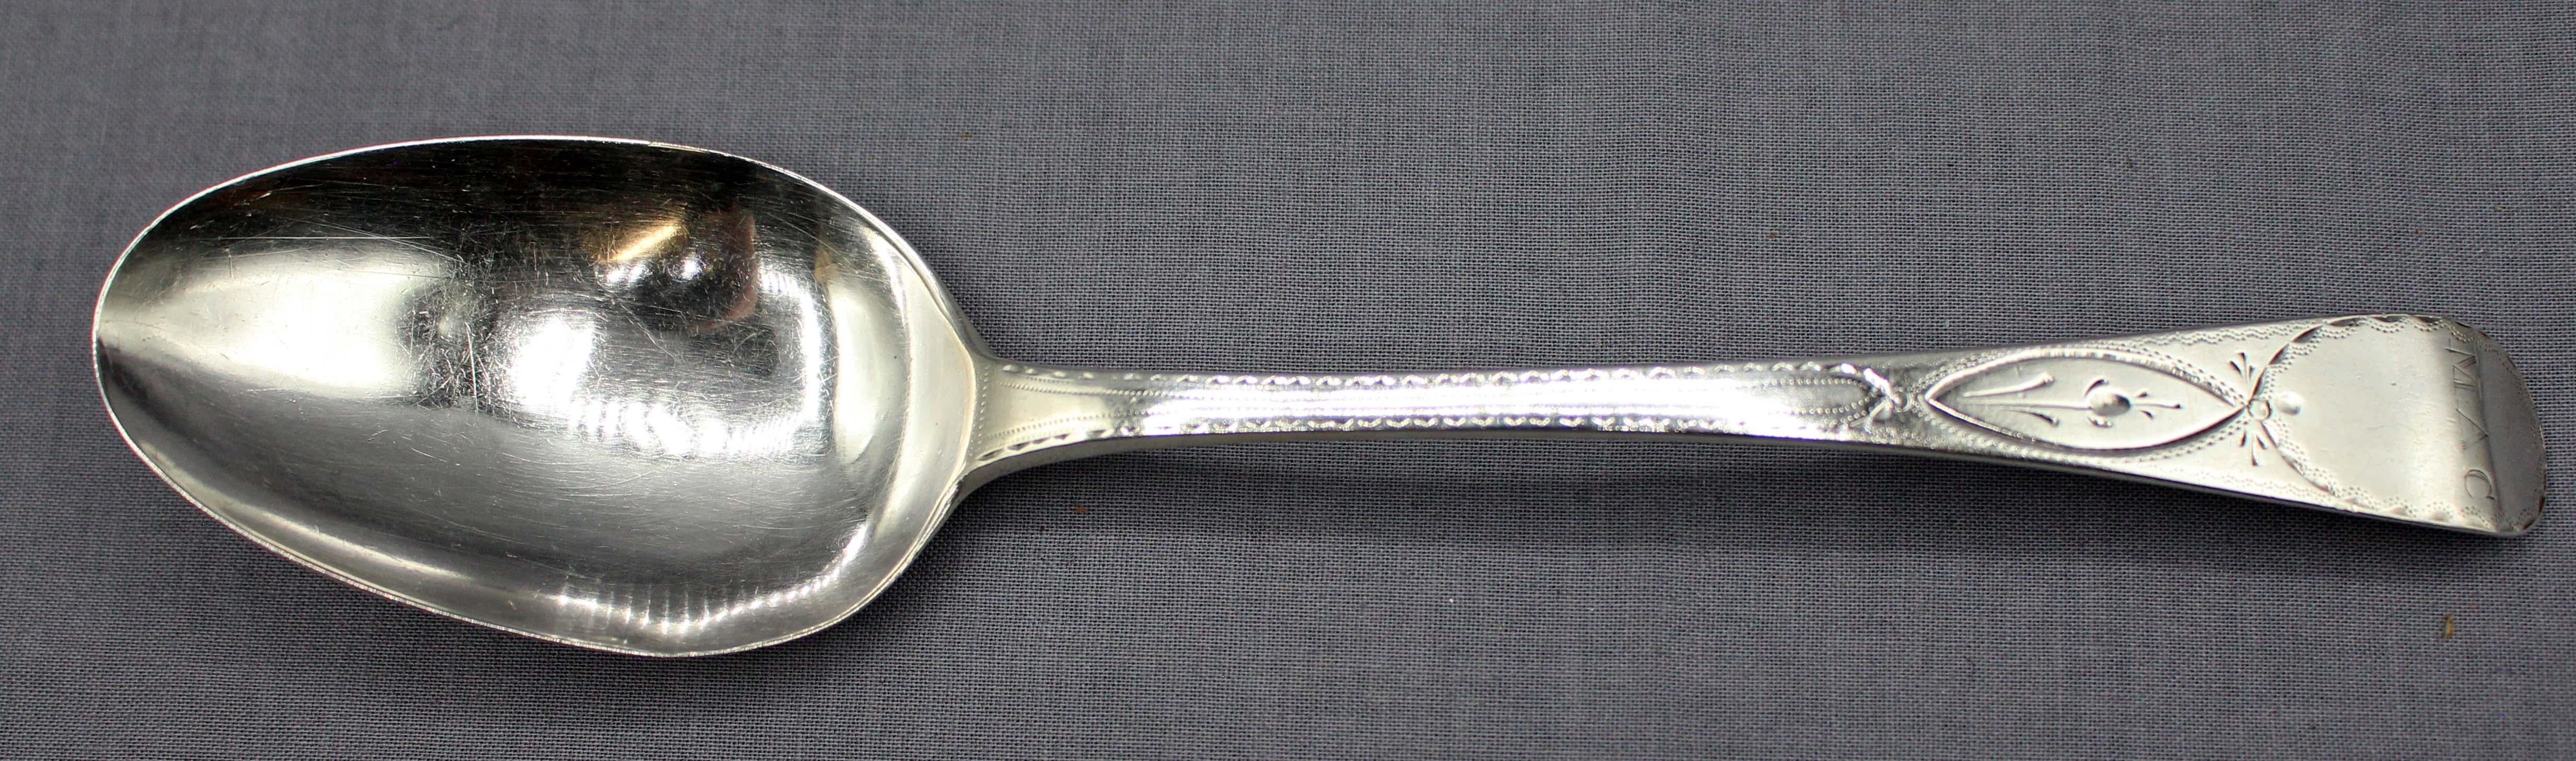 English Sterling Silver Tablespoon by William Bateman I, London, 1817 For Sale